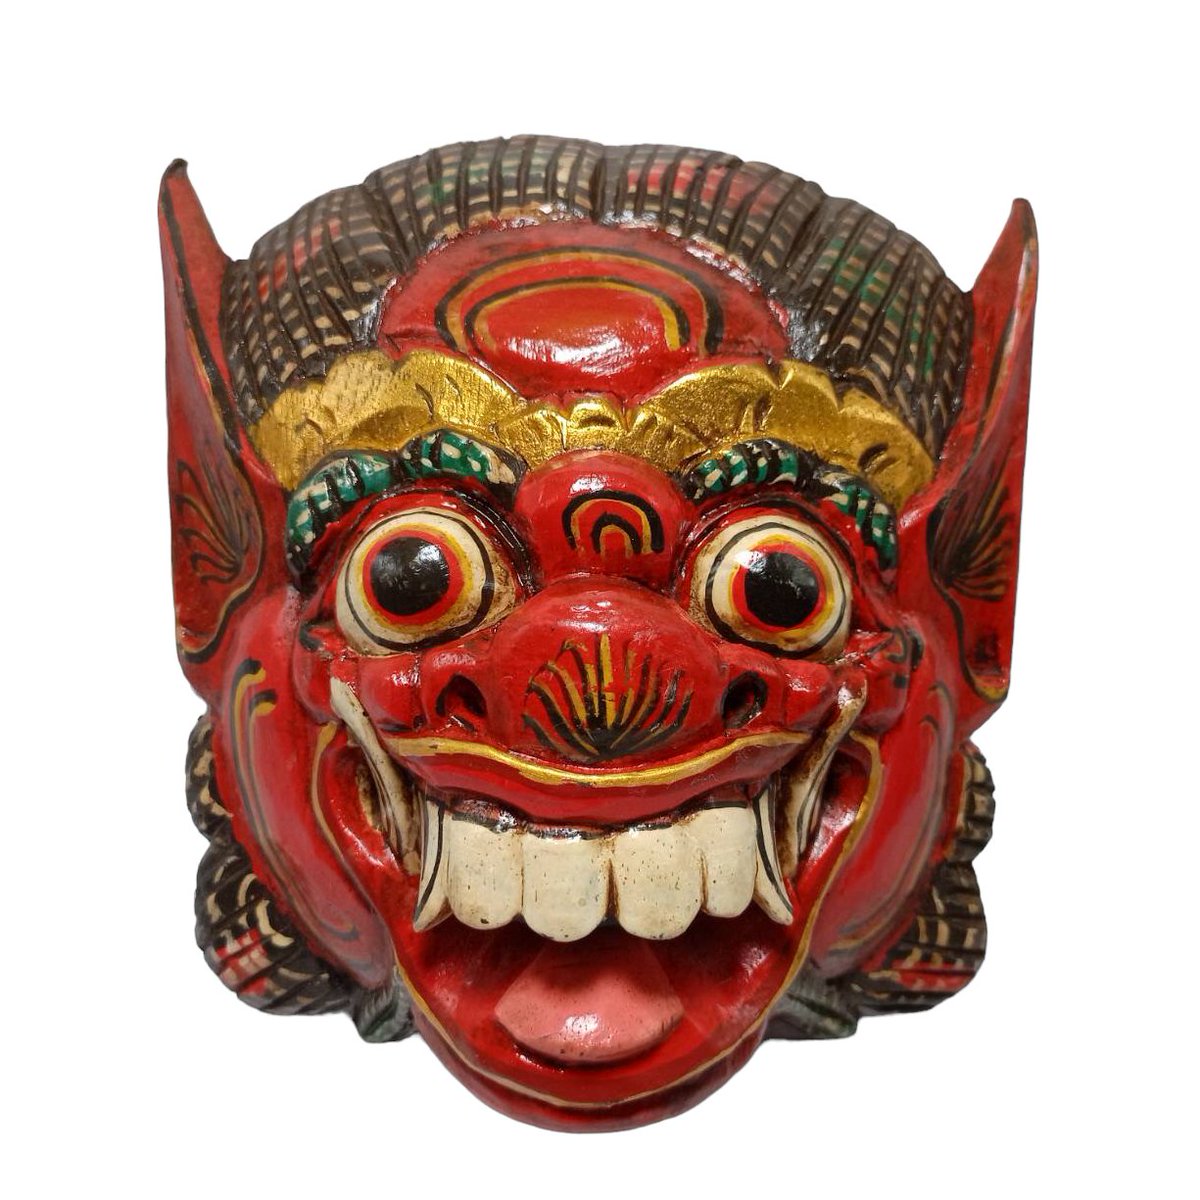 Check out Red Balinese Barong Indonesia Mask Traditional Hand Carved Wall Decor Haning #IndonesianCraftsmanship #HandCarved #WoodenArt #AsianTheme #HomeDecor #WallArt #RedMask #IndonesianCulture ebay.com/itm/2764388017… #eBay via @eBay